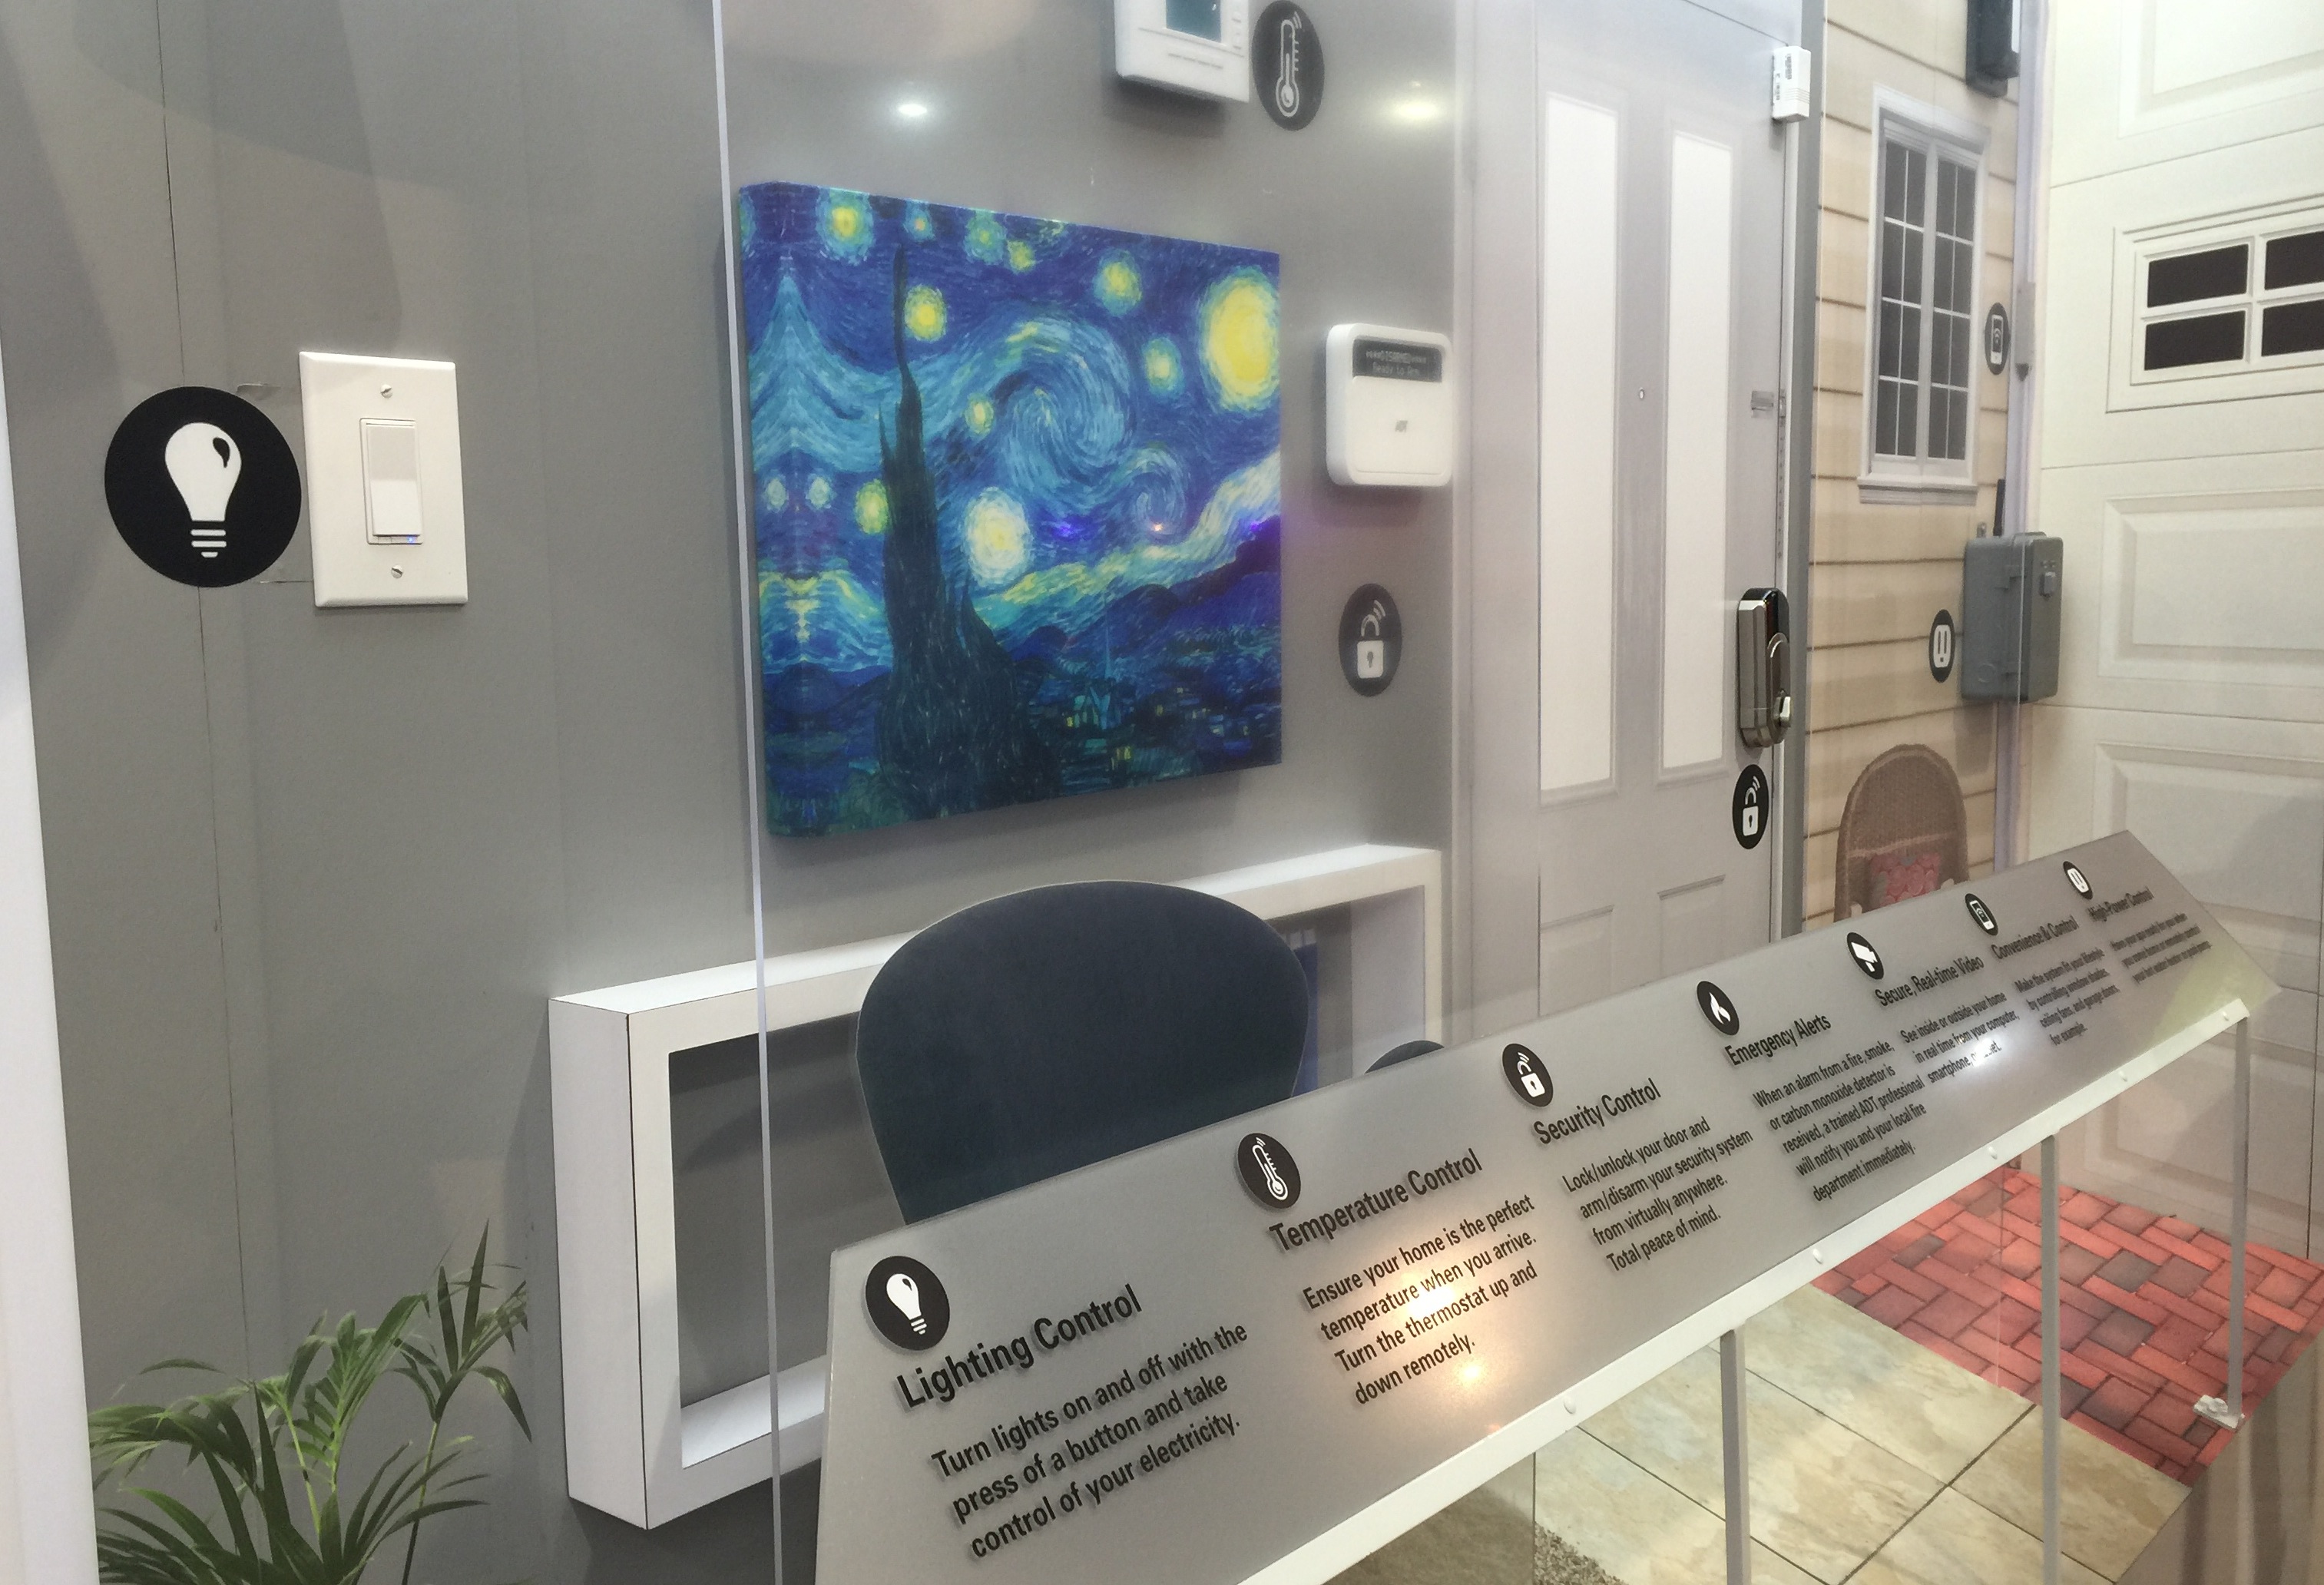 ADT showcased a security system that connects consumers appliances to create a secure, smart home.